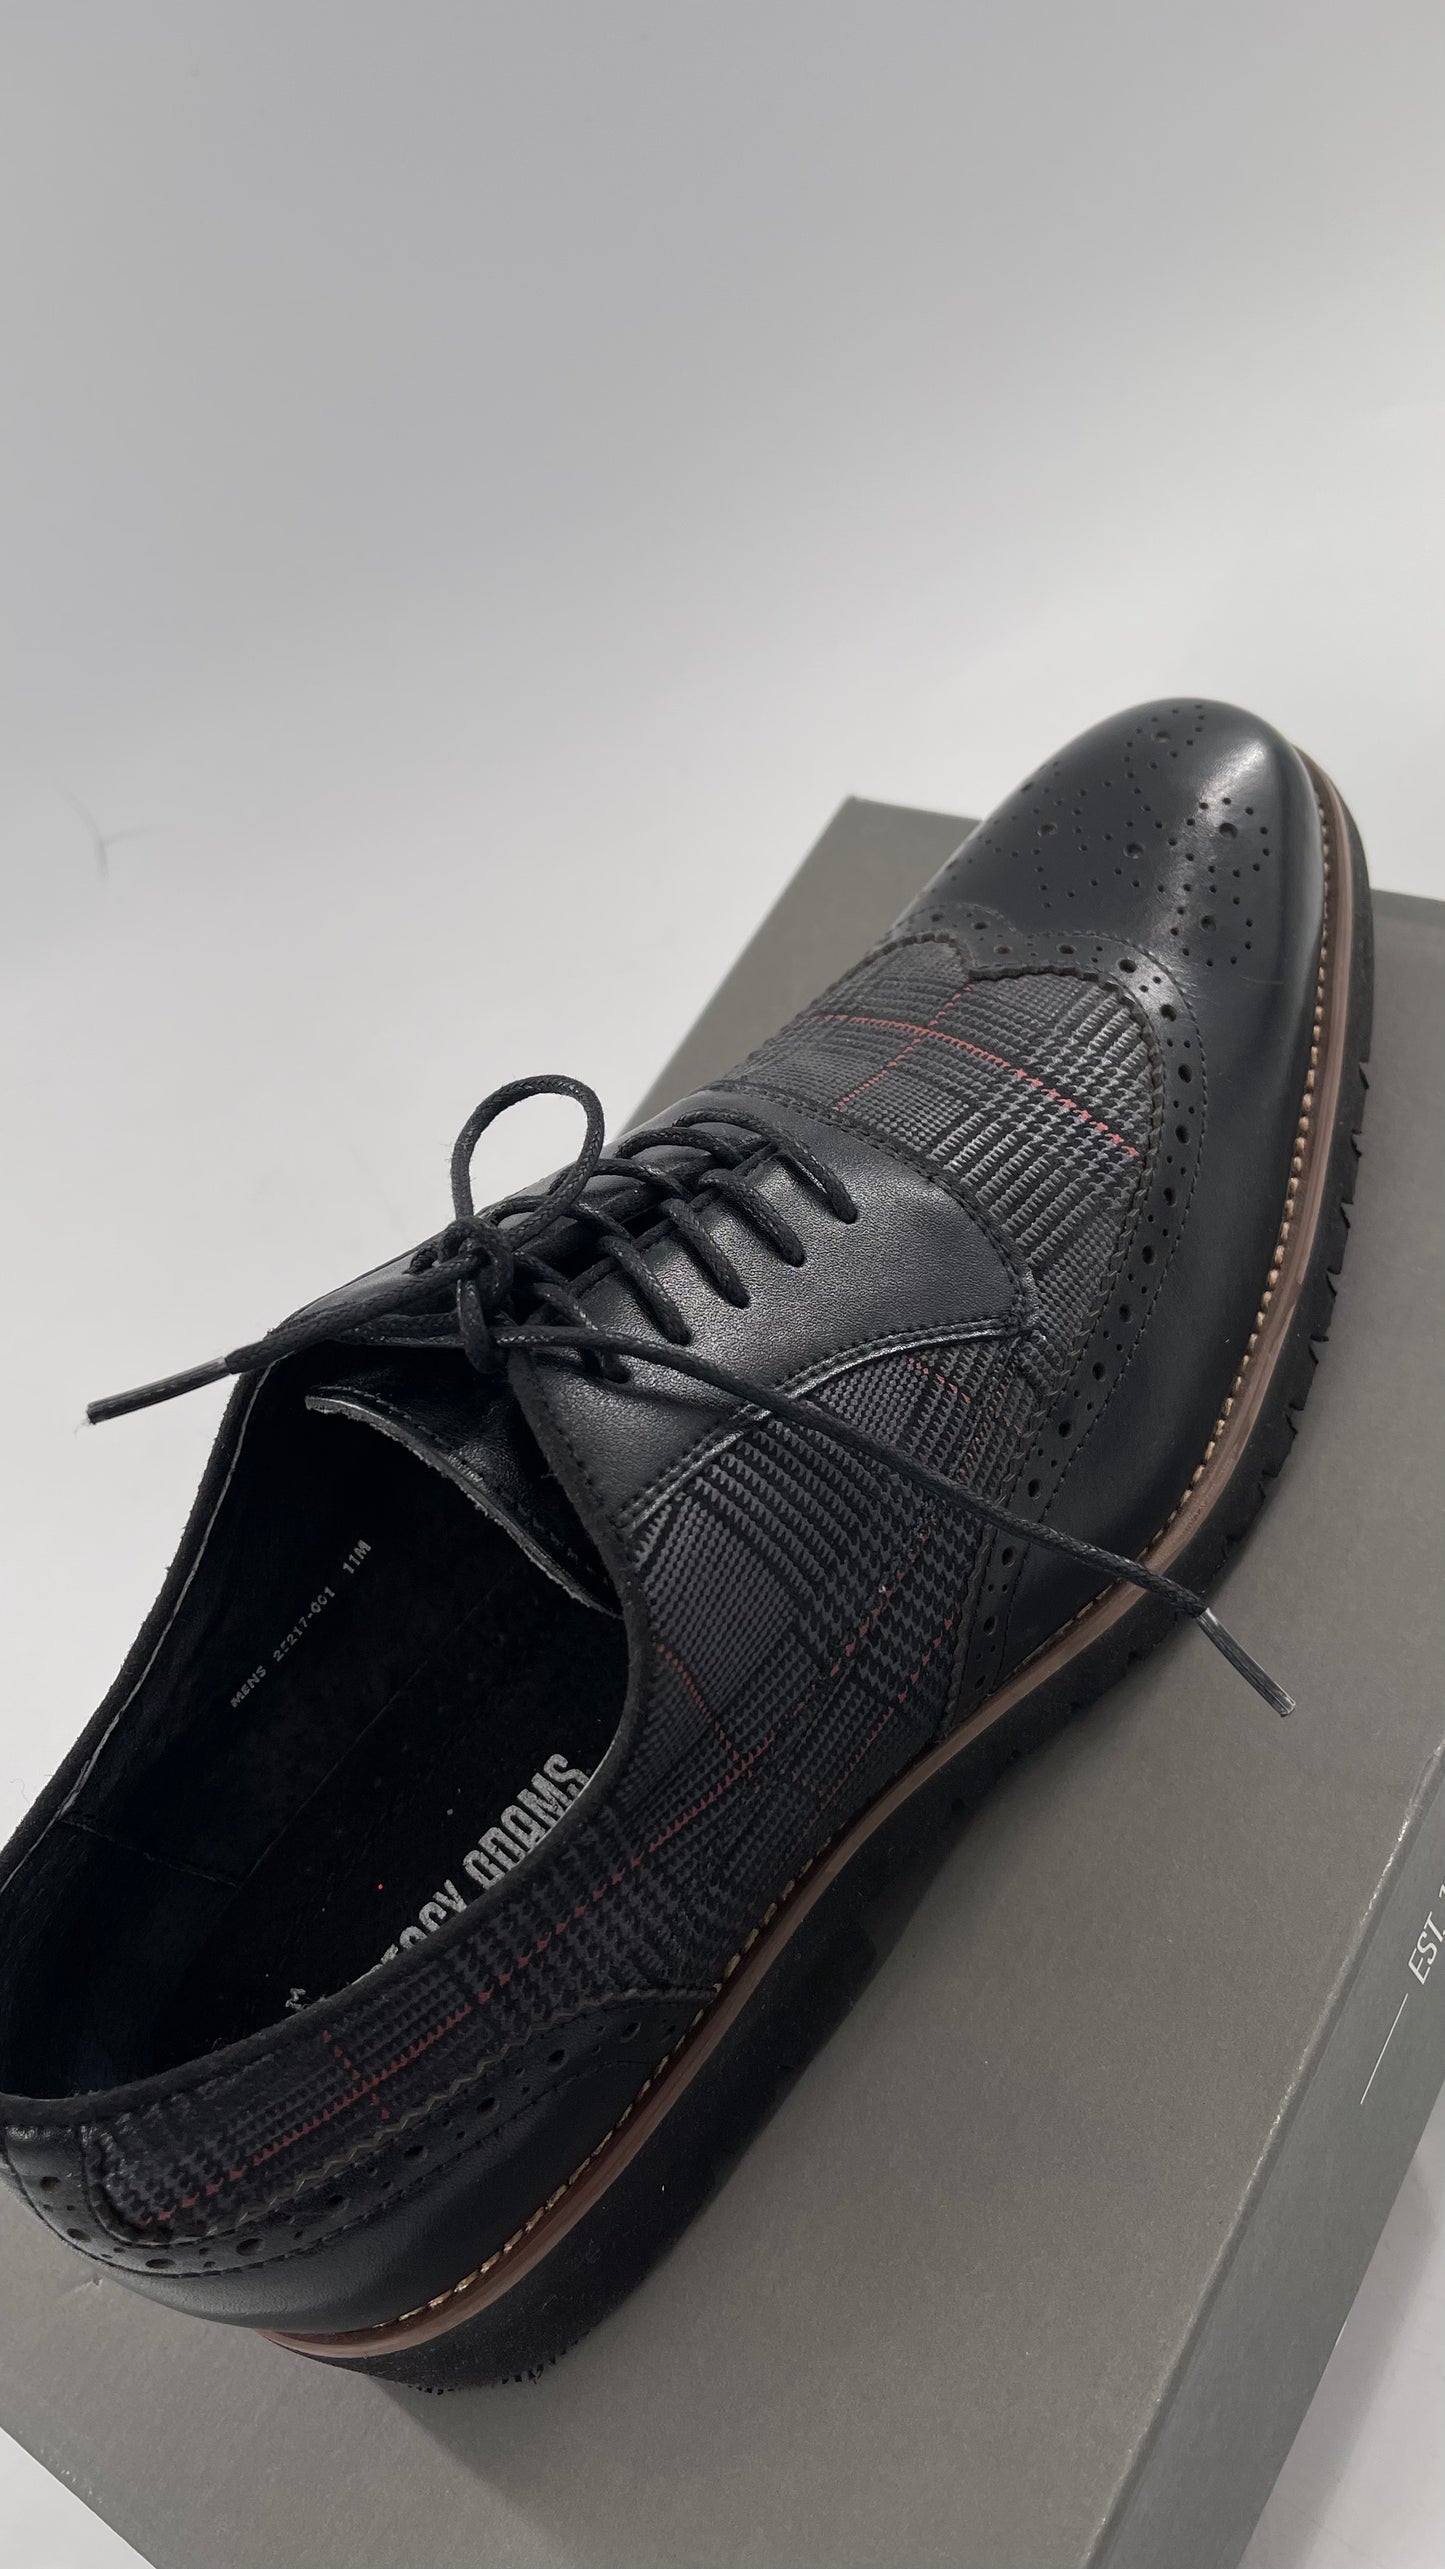 Stacy Adam’s Grey and Black, Plaid and Leather WingTip Oxfords (11)